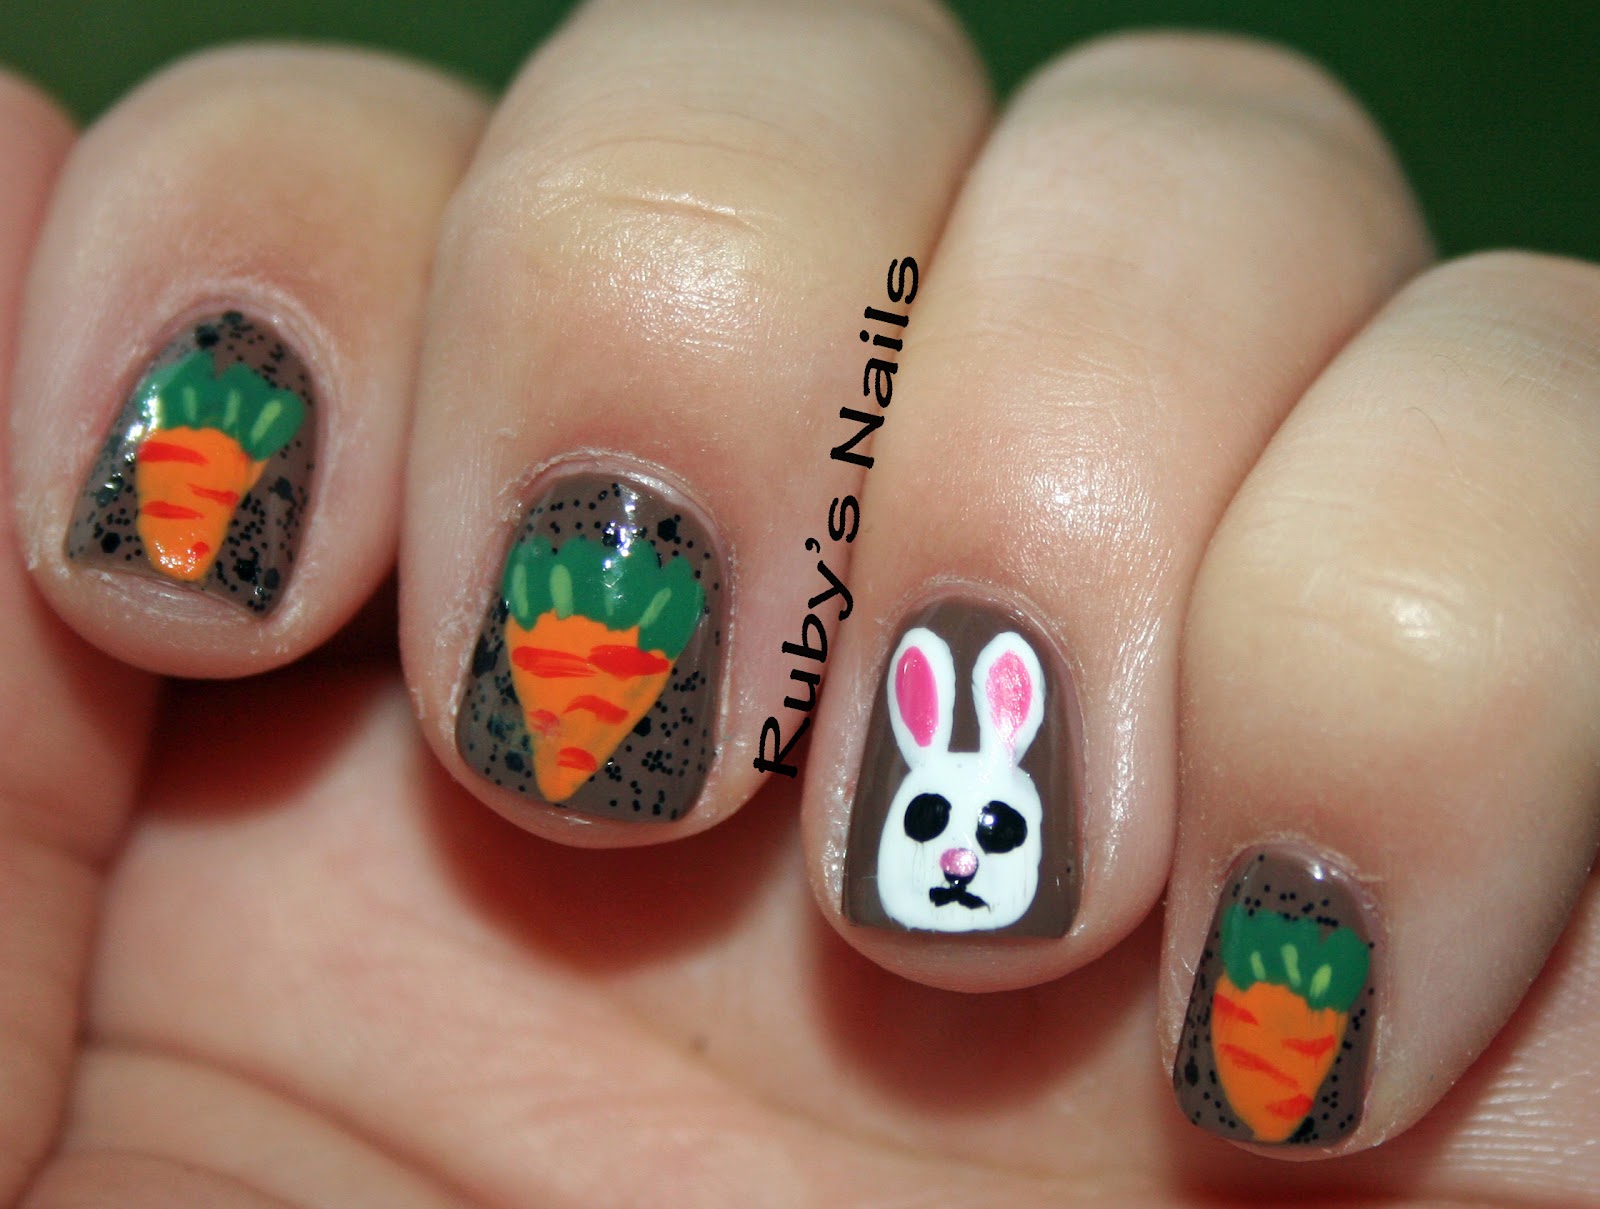 Ruby's Nails: Bunny and carrots